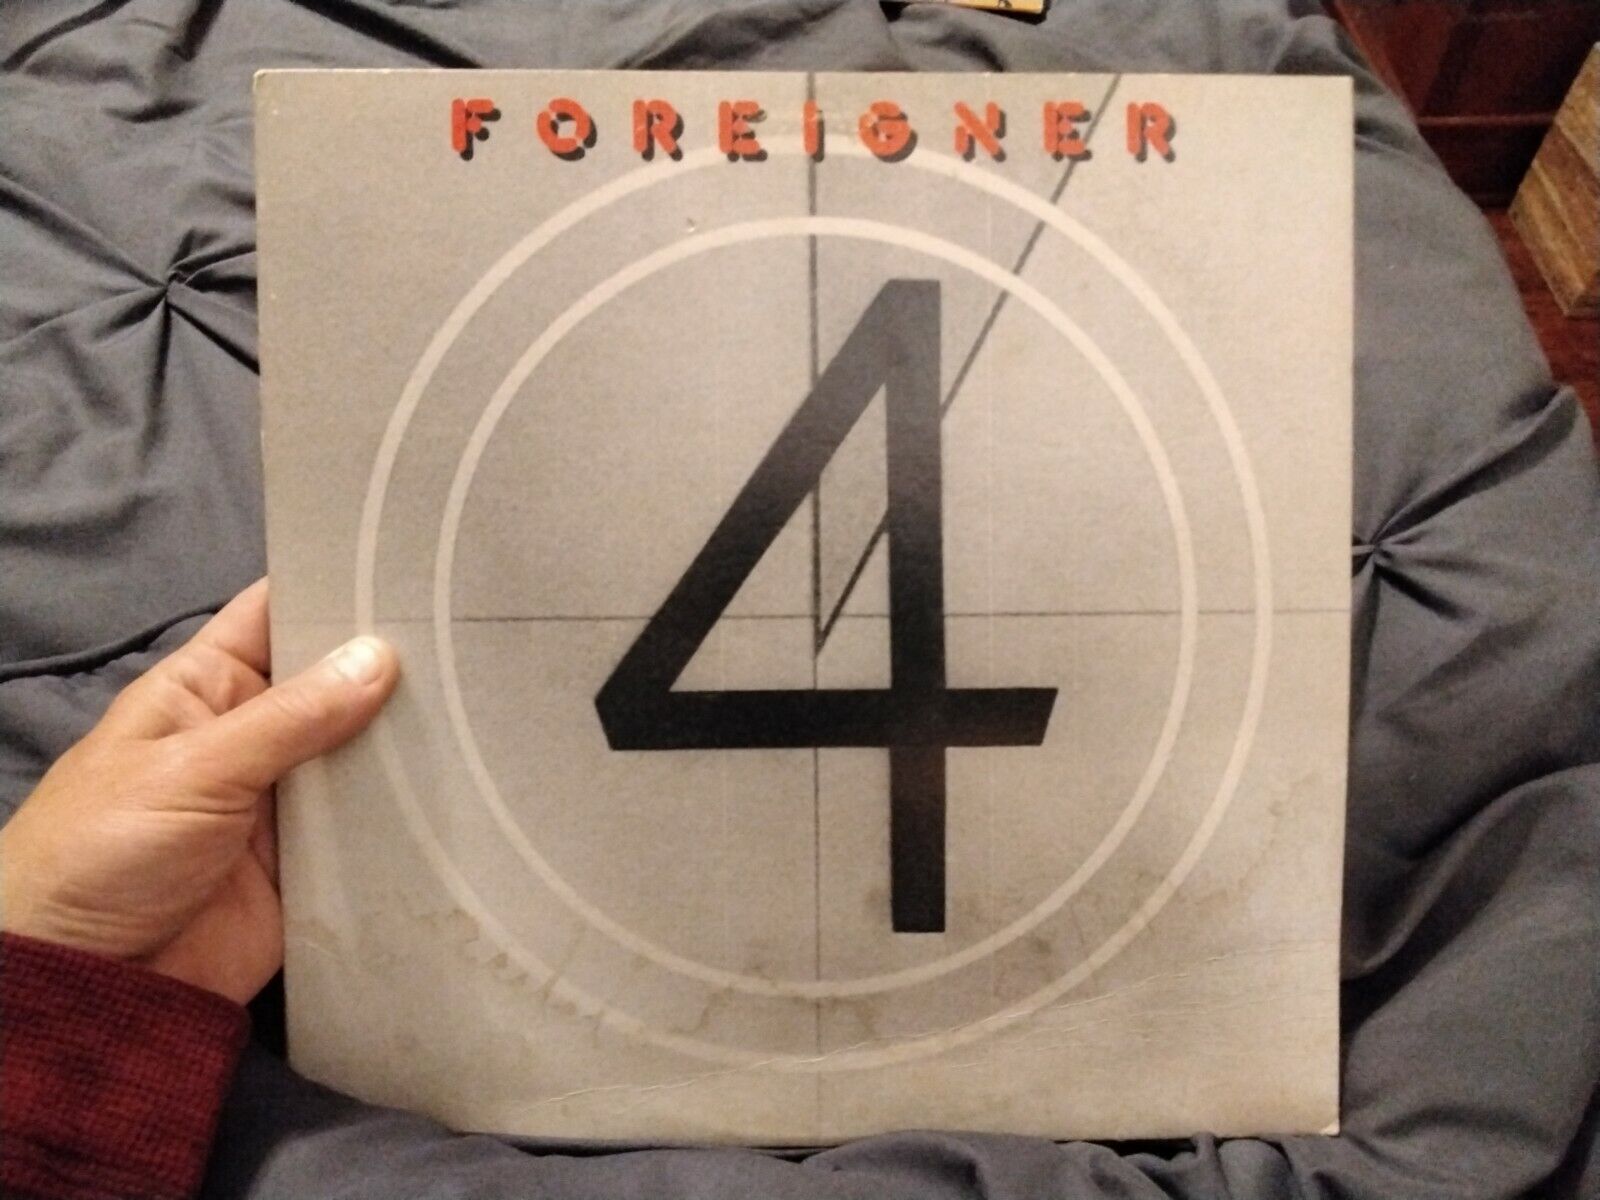 FOREIGNER ~ 4 ~ LP Record Atlantic 1981  SD 16999 Clean!